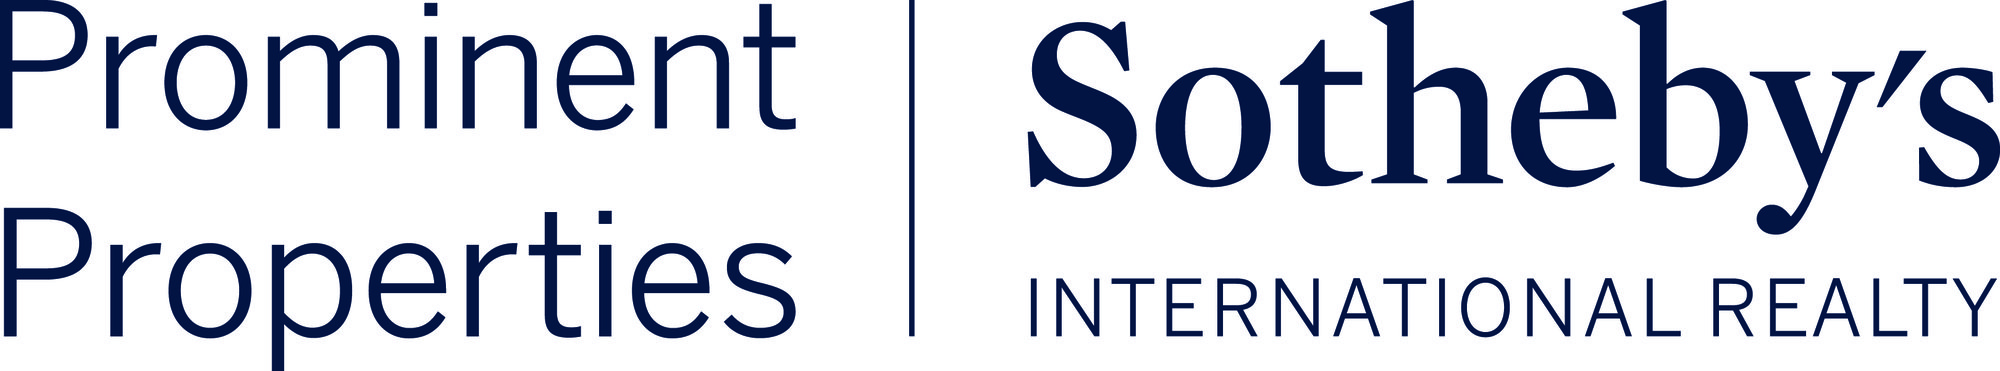 Sotheby’s International Realty